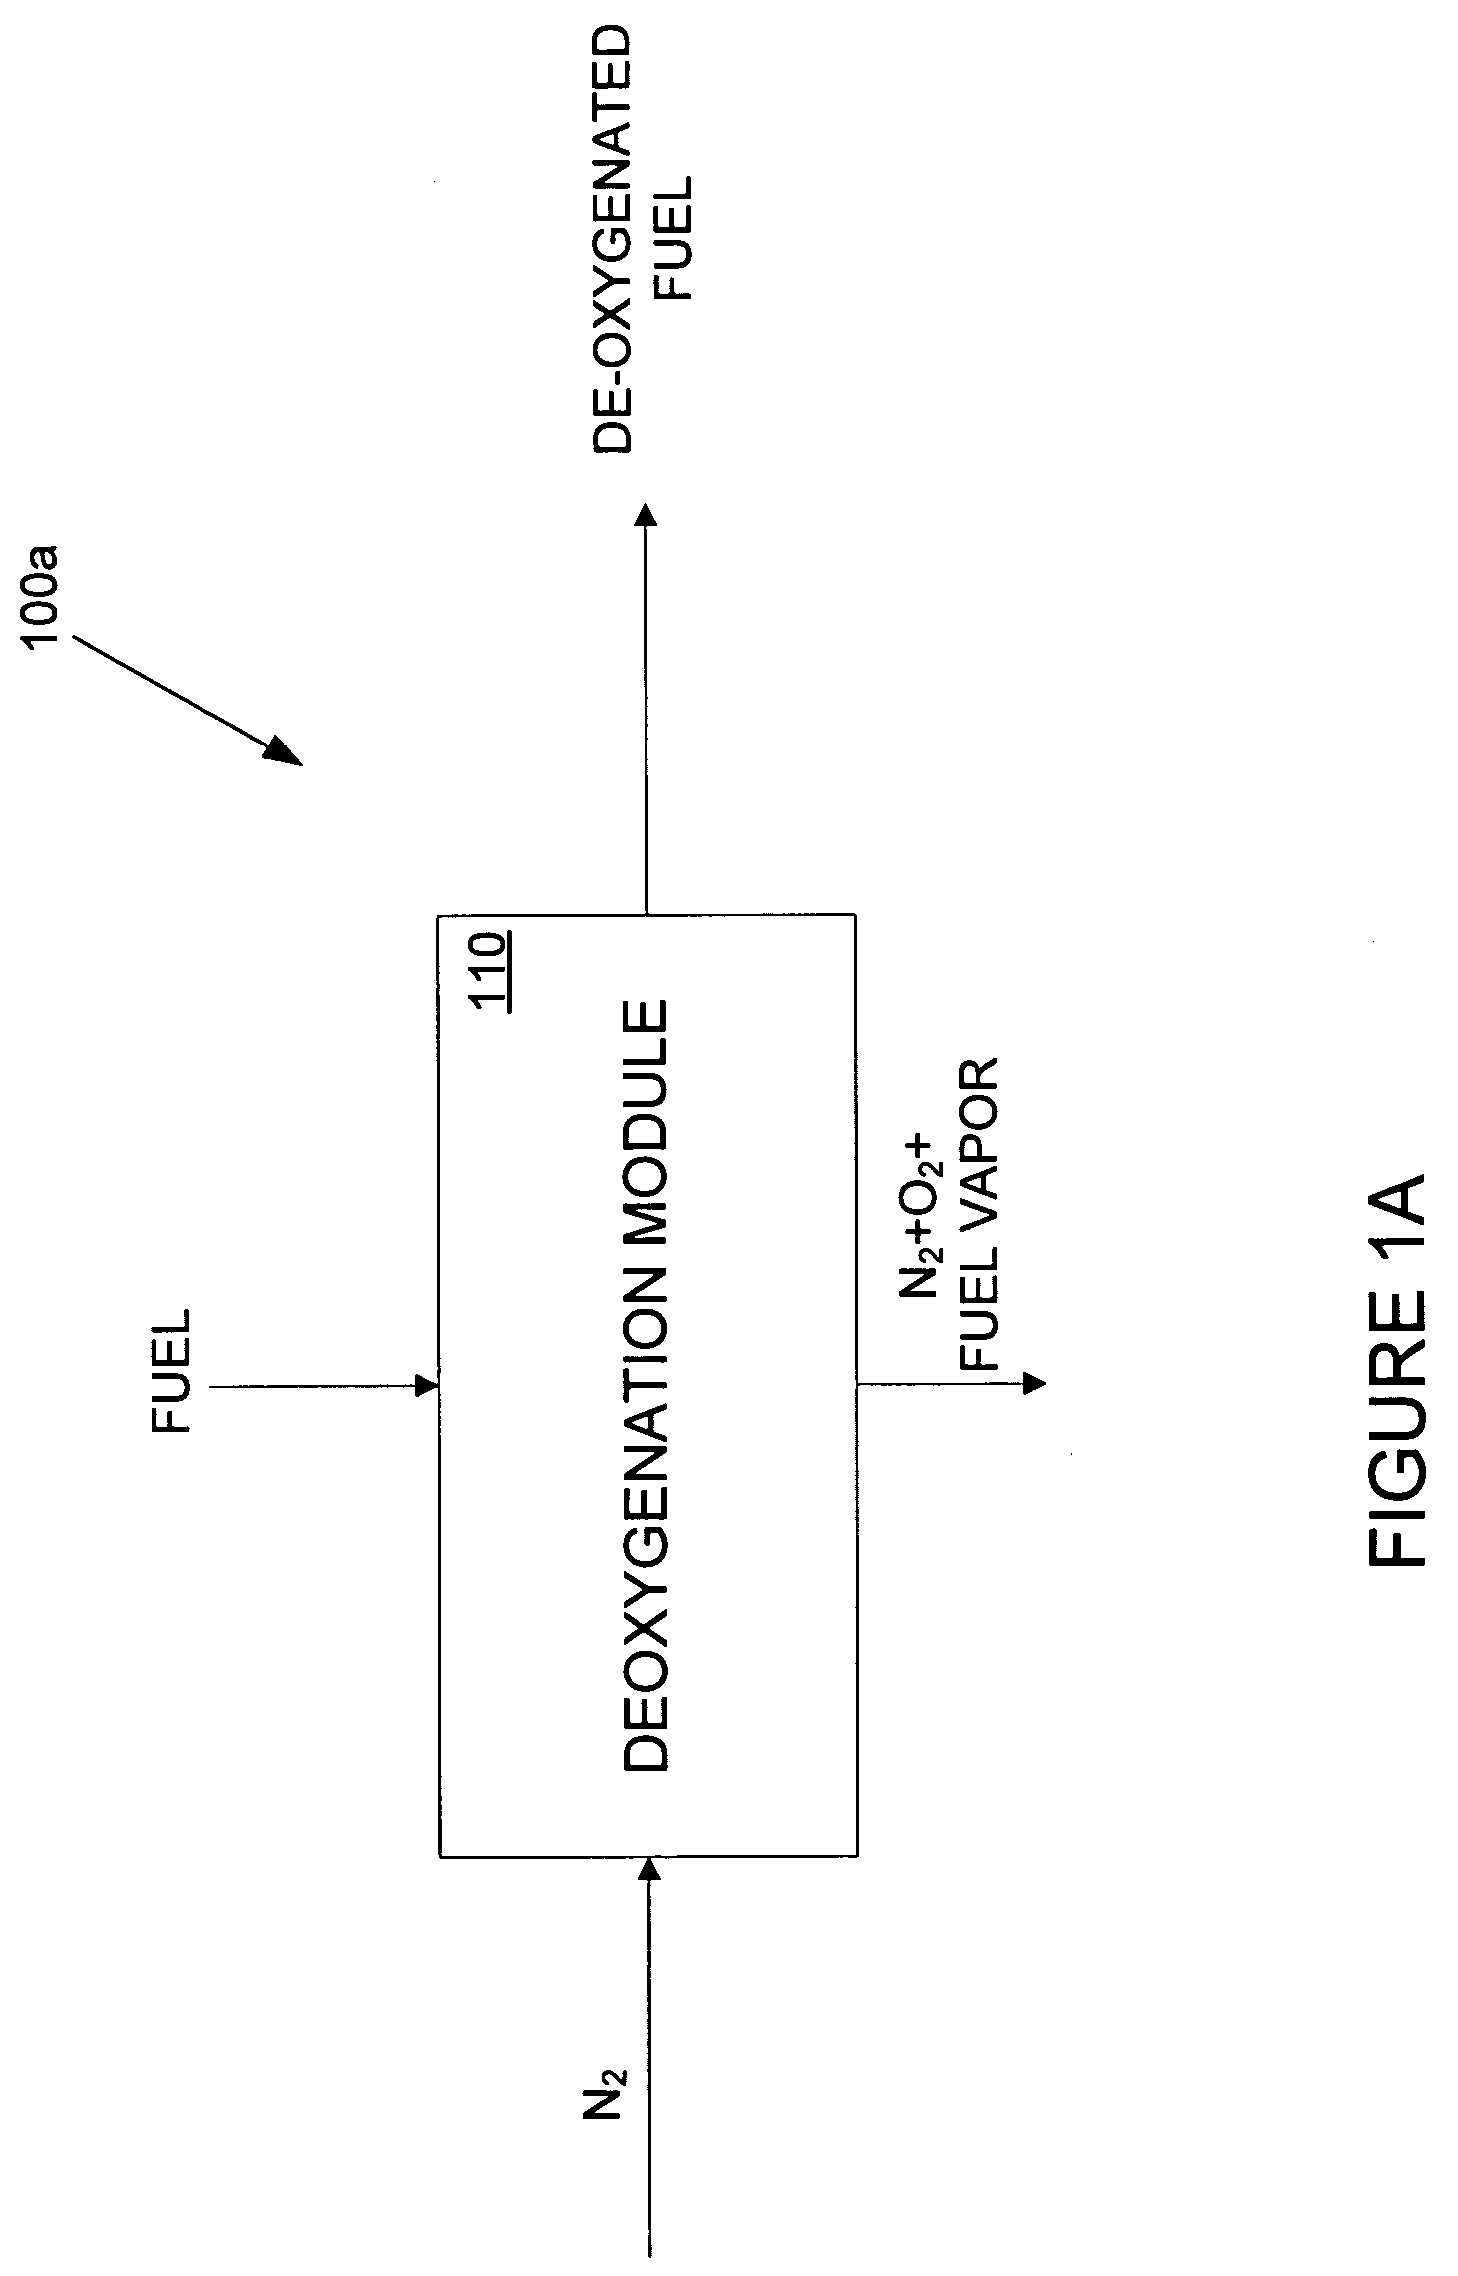 Contacting systems and methods and uses thereof